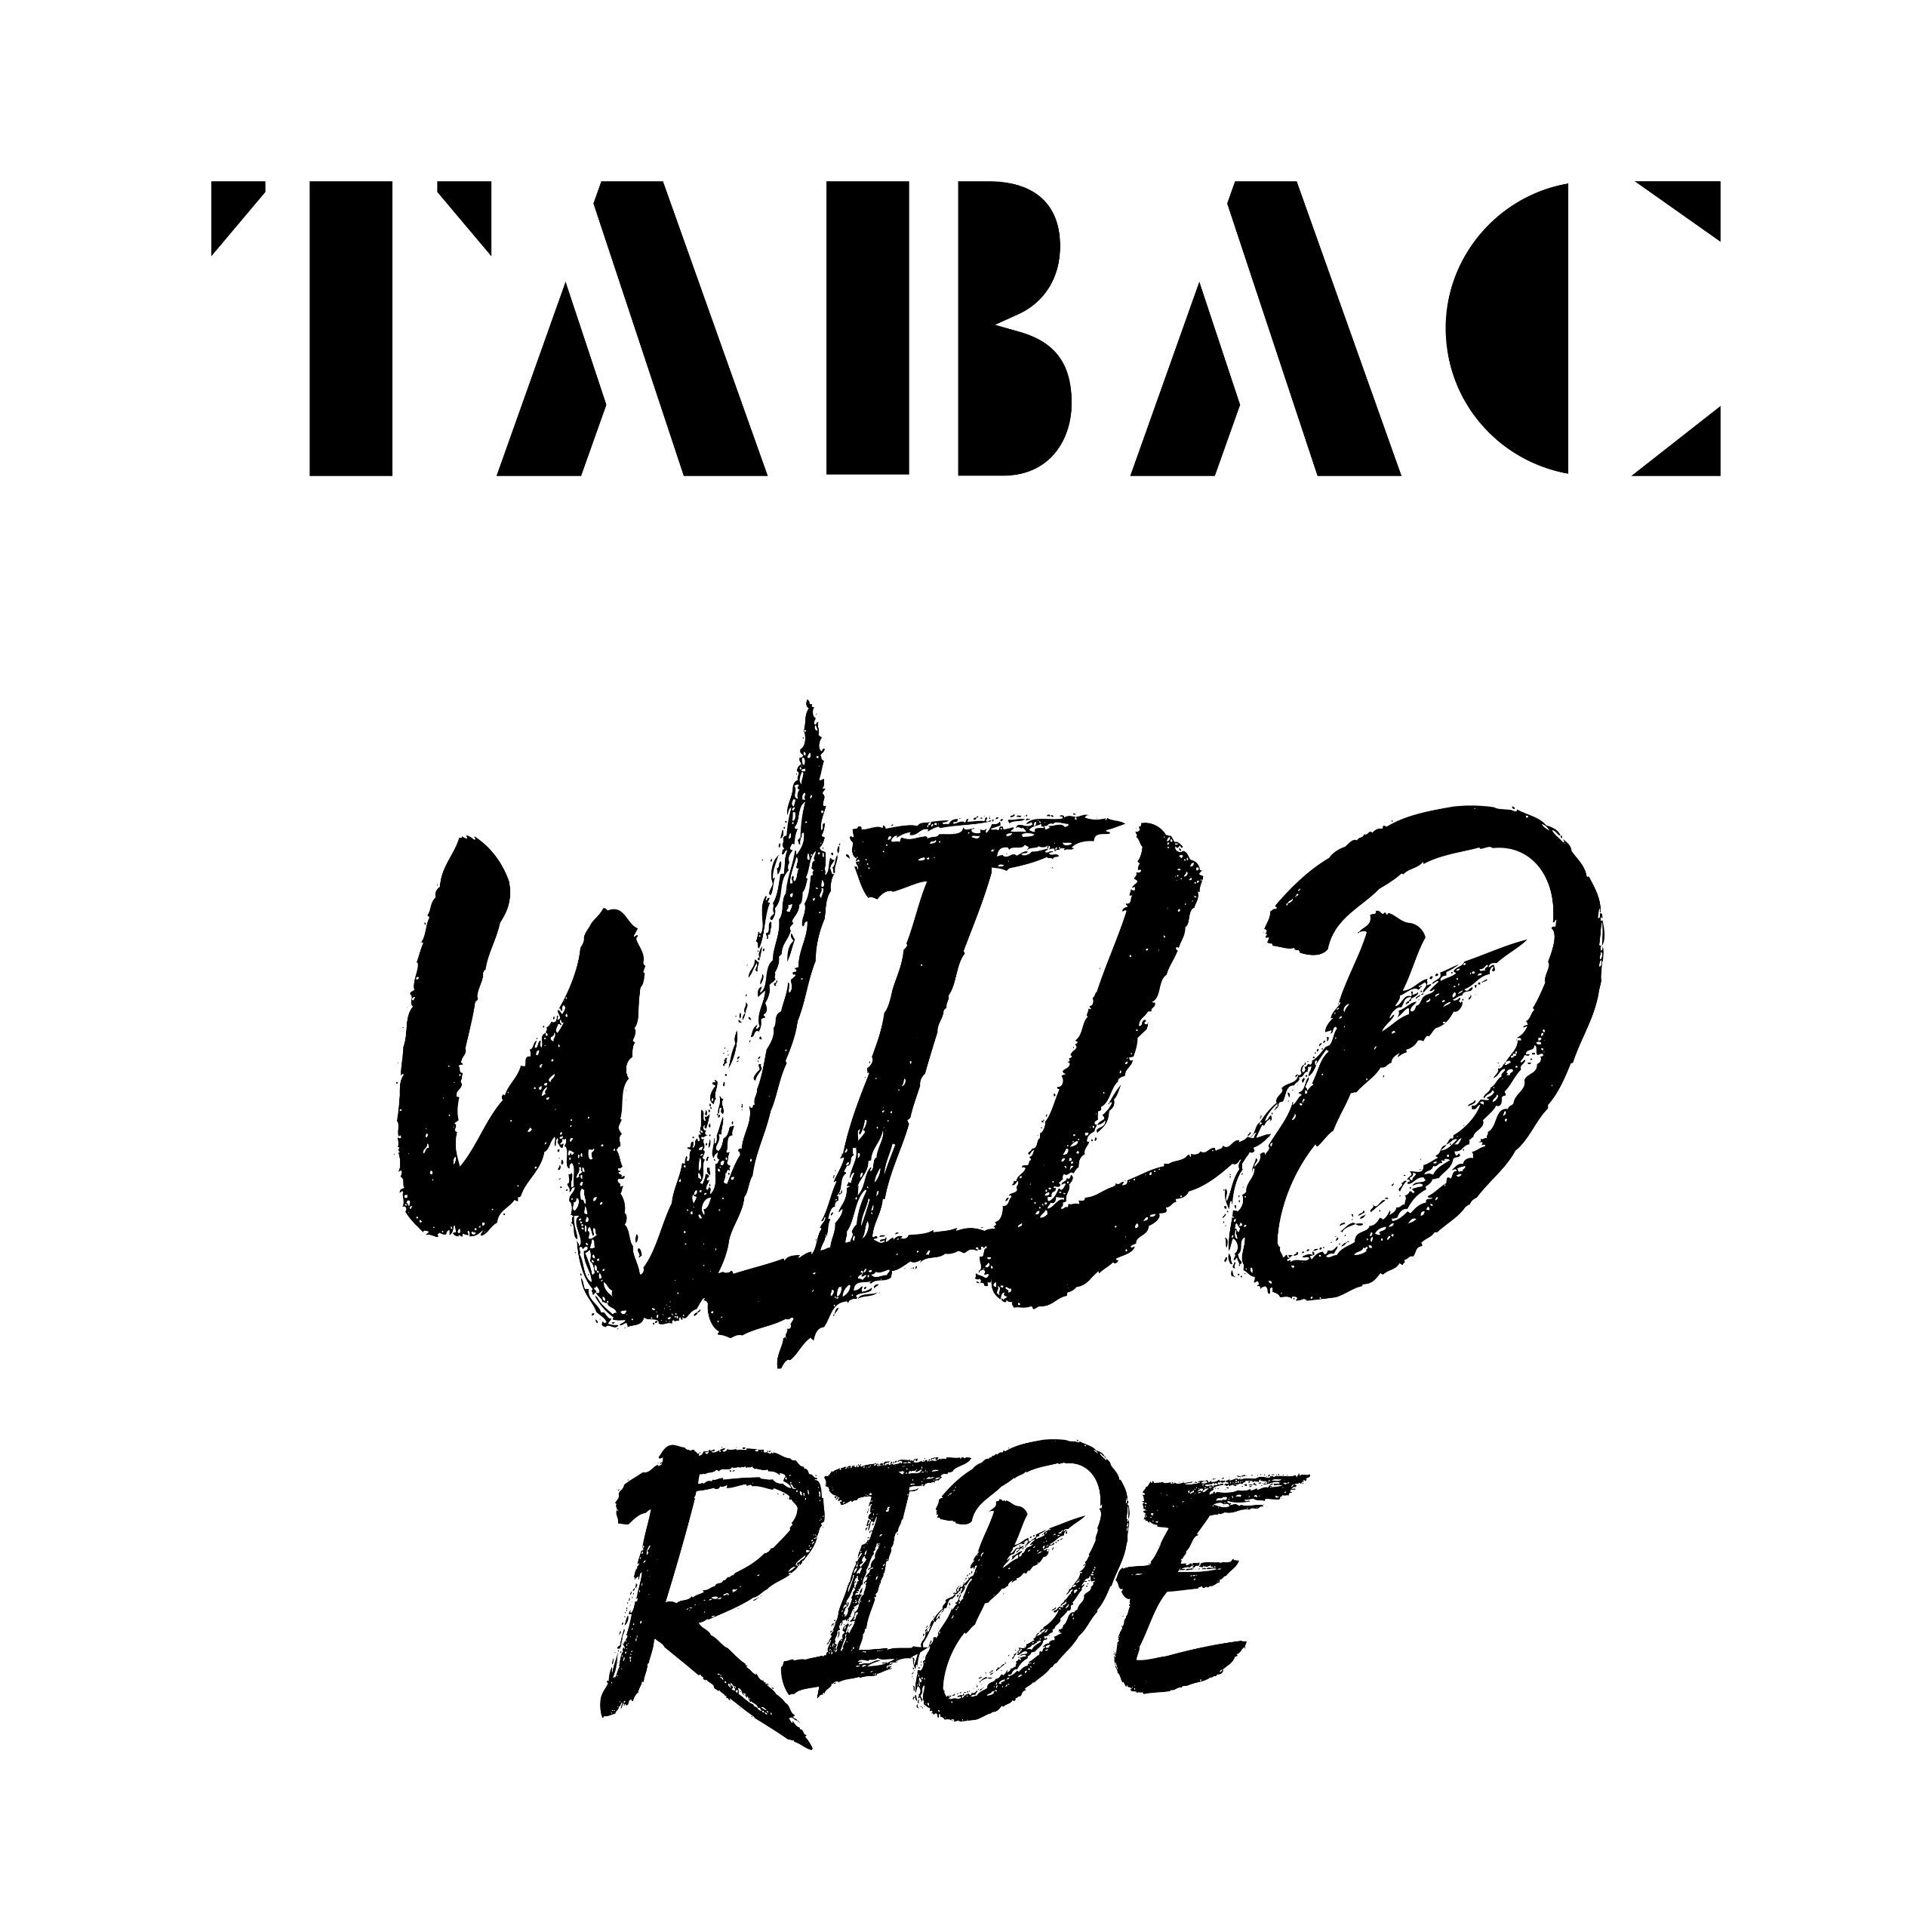 Lotion Tabac After Ride Ride Wild ml Shave Gesichts-Reinigungslotion 125 Tabac Wild